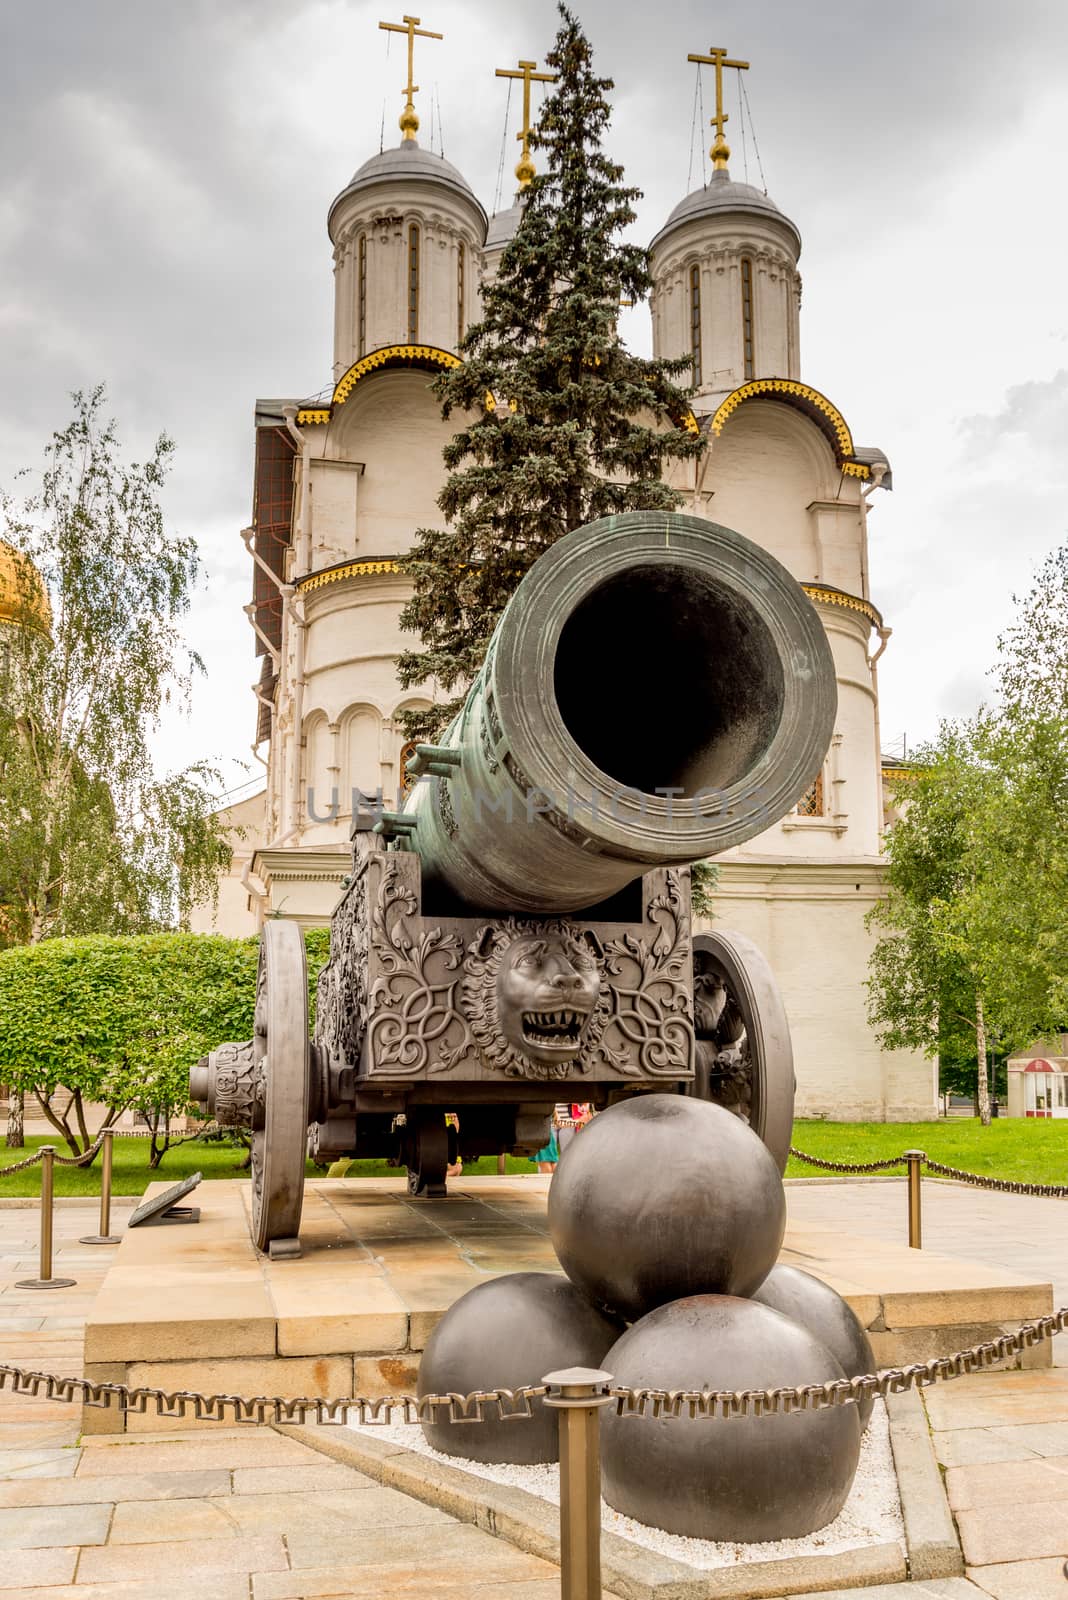 Tsar cannon at the Kremlin in Moscow